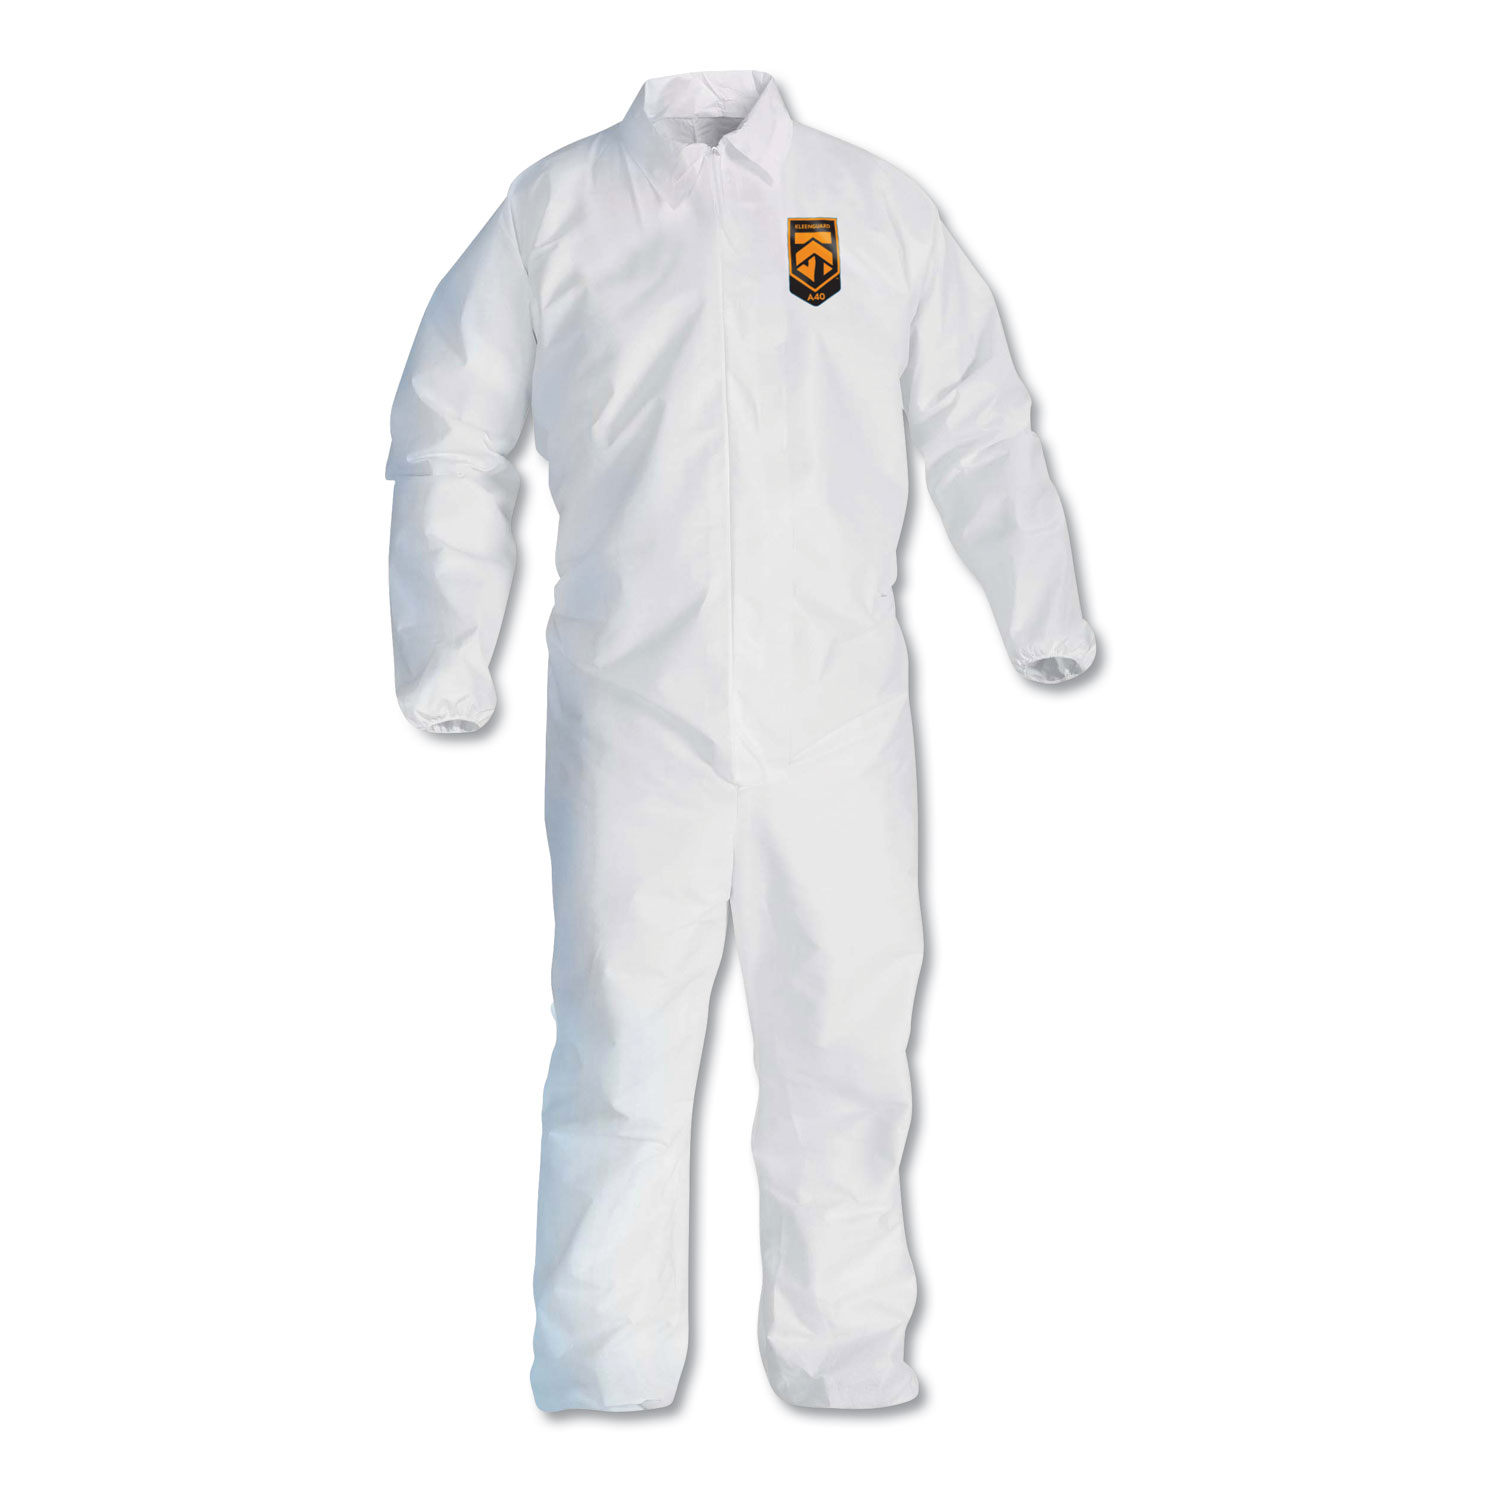  KleenGuard KCC 44317 A40 Elastic-Cuff and Ankles Coveralls, 4X-Large, White, 25/Carton (KCC44317) 